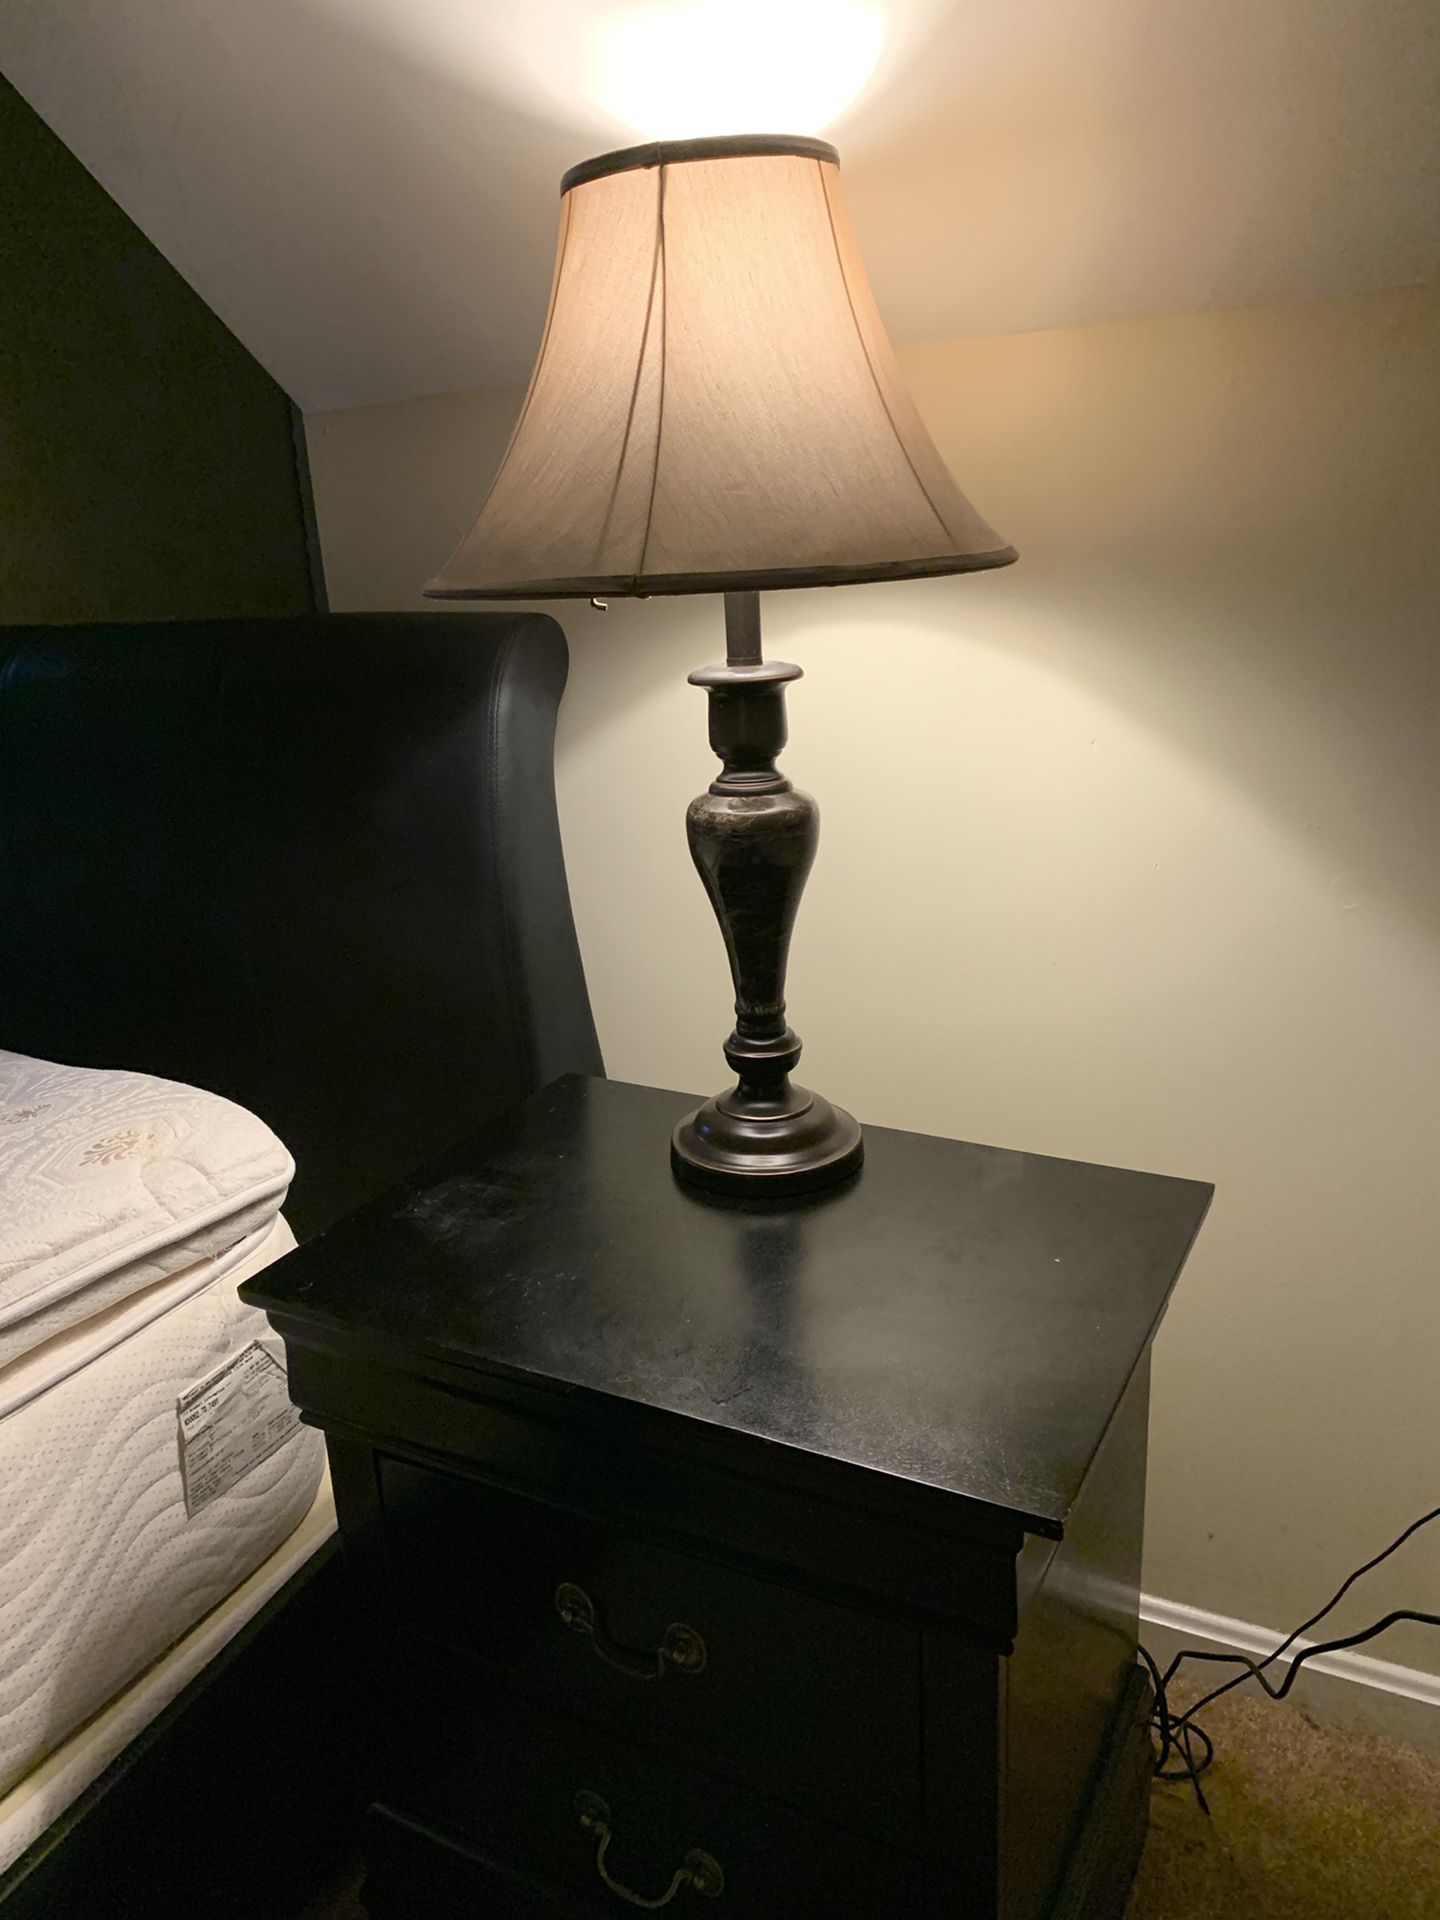 SIDE DRESSERS / SIDE LAMPS SEPARATE/ HOUSE FURNITURE SALE